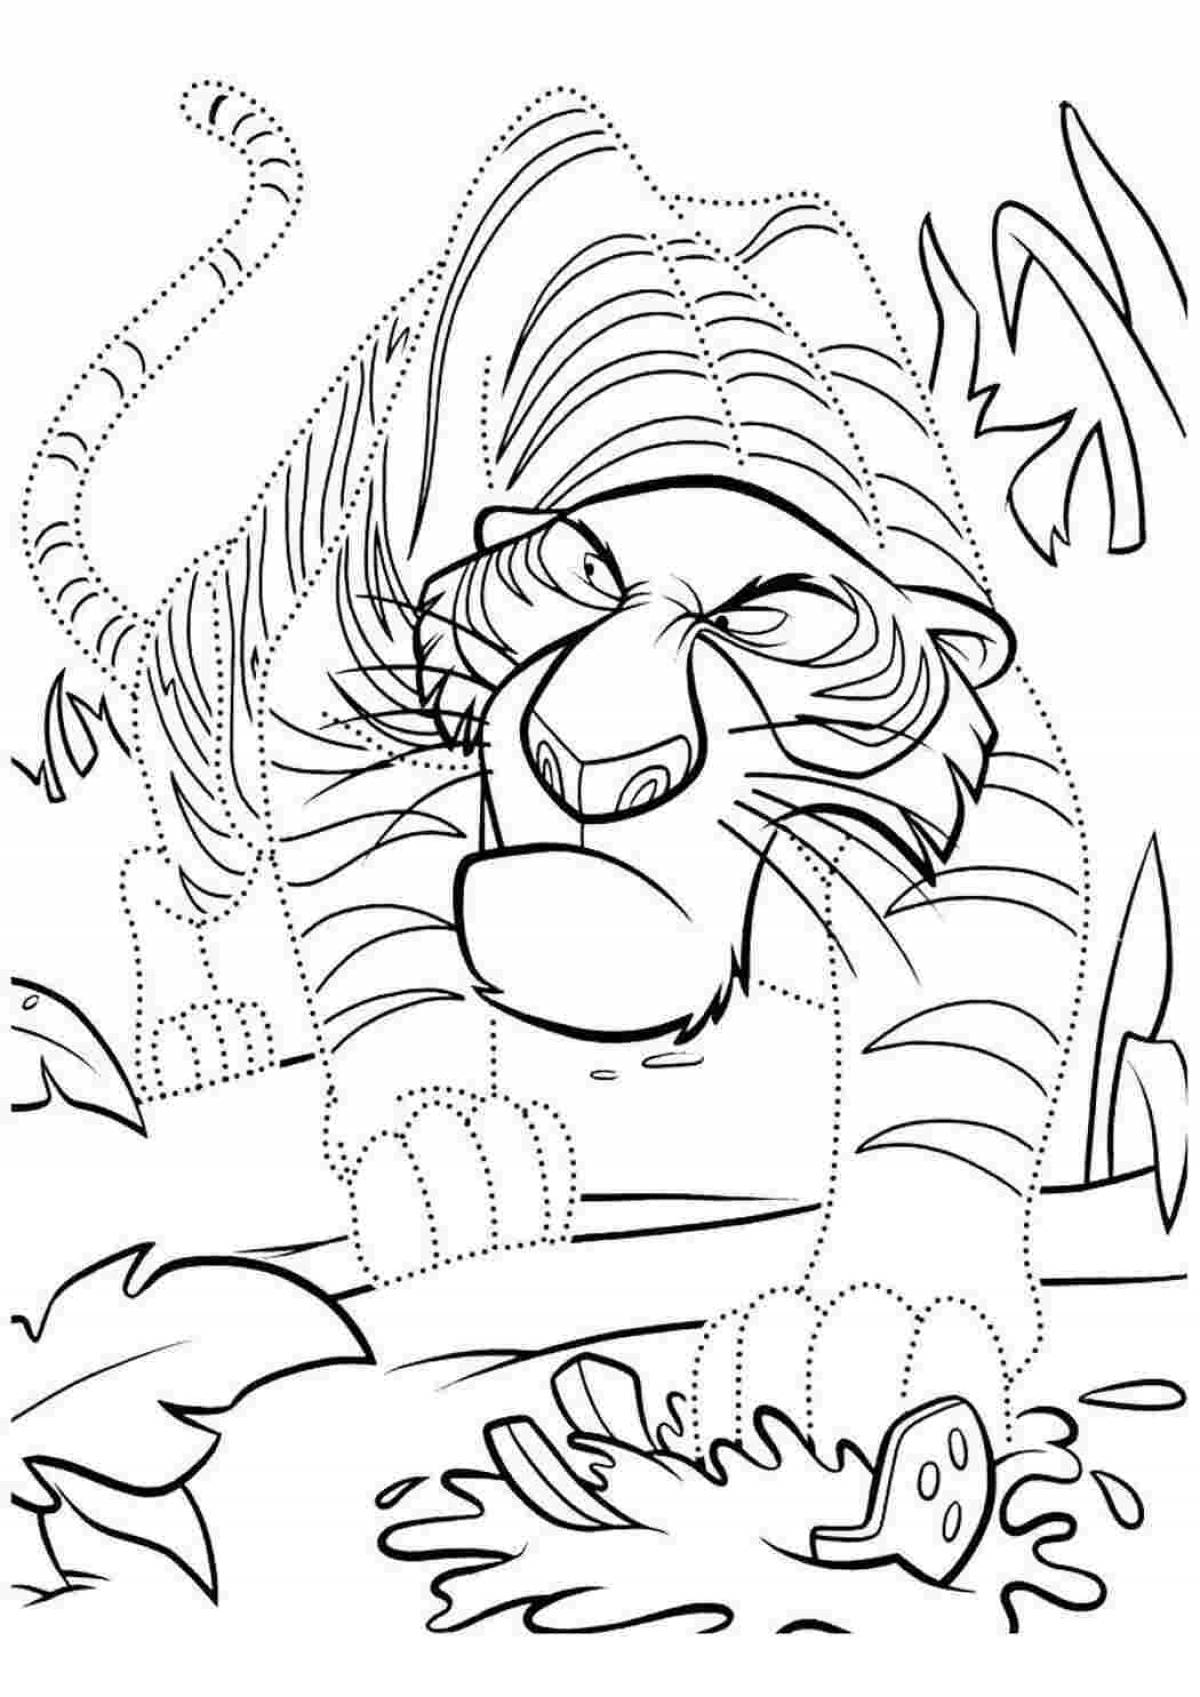 Coloring book glowing color tiger sherkhan